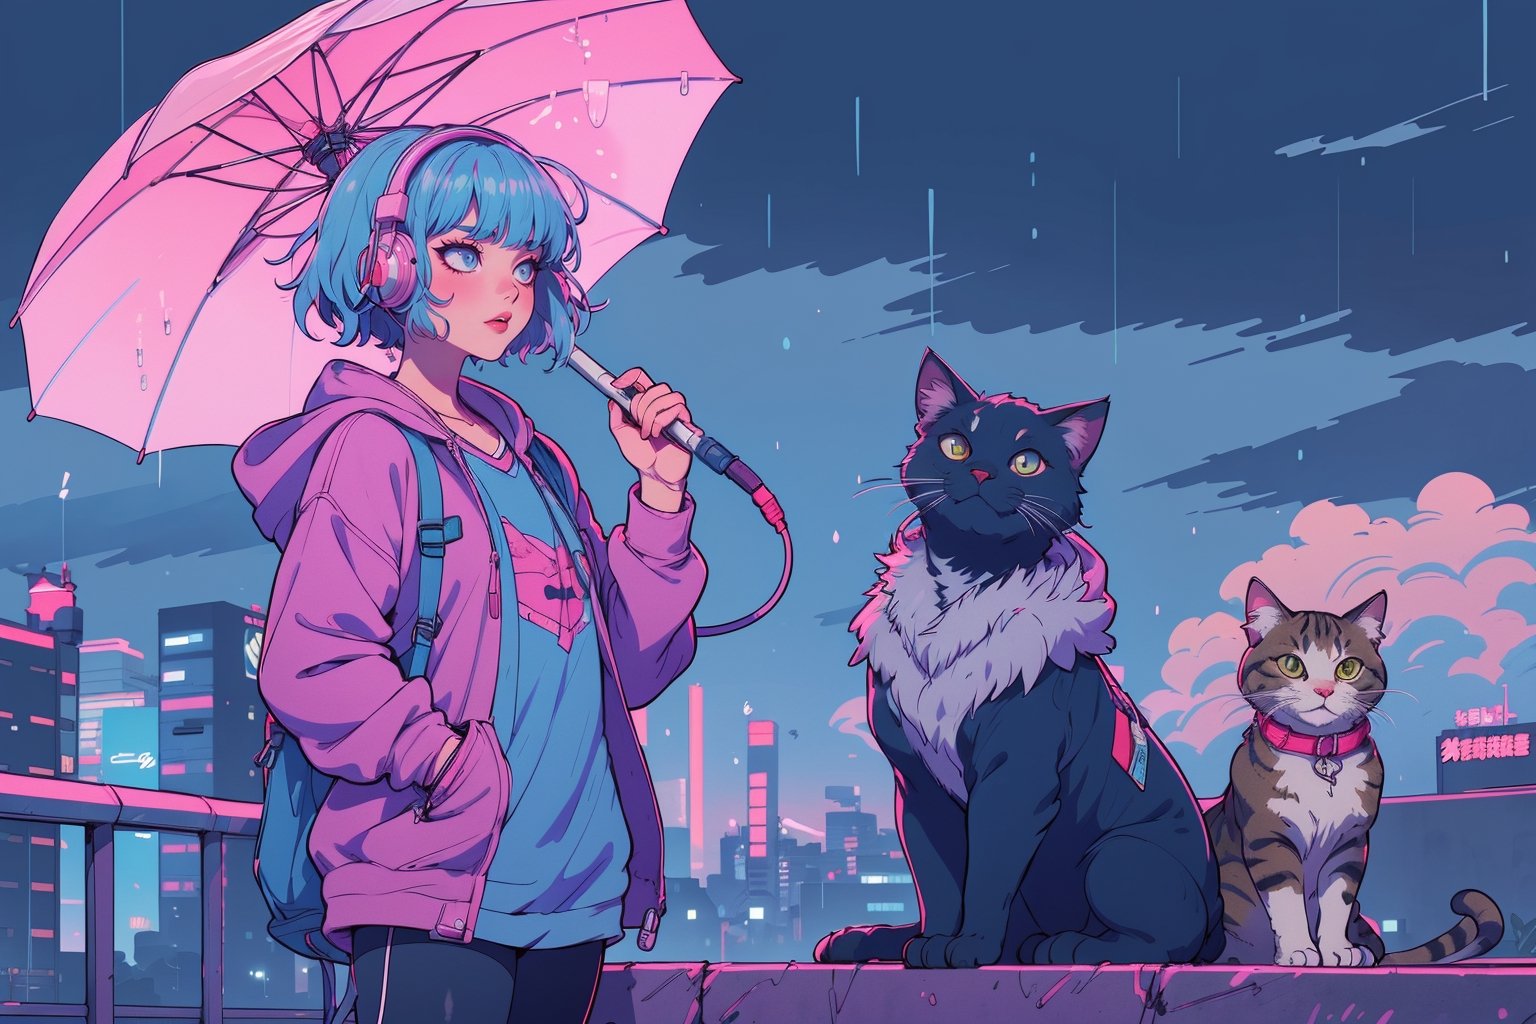 Lofi Girl and cat WAITING FOR BUS under umbrella, headphone, cloudy outside, rain, wind, beautiful chill, cyber city, atmospheric wallpaper. 4K streaming background. lo-fi, hip-hop style. Anime manga style